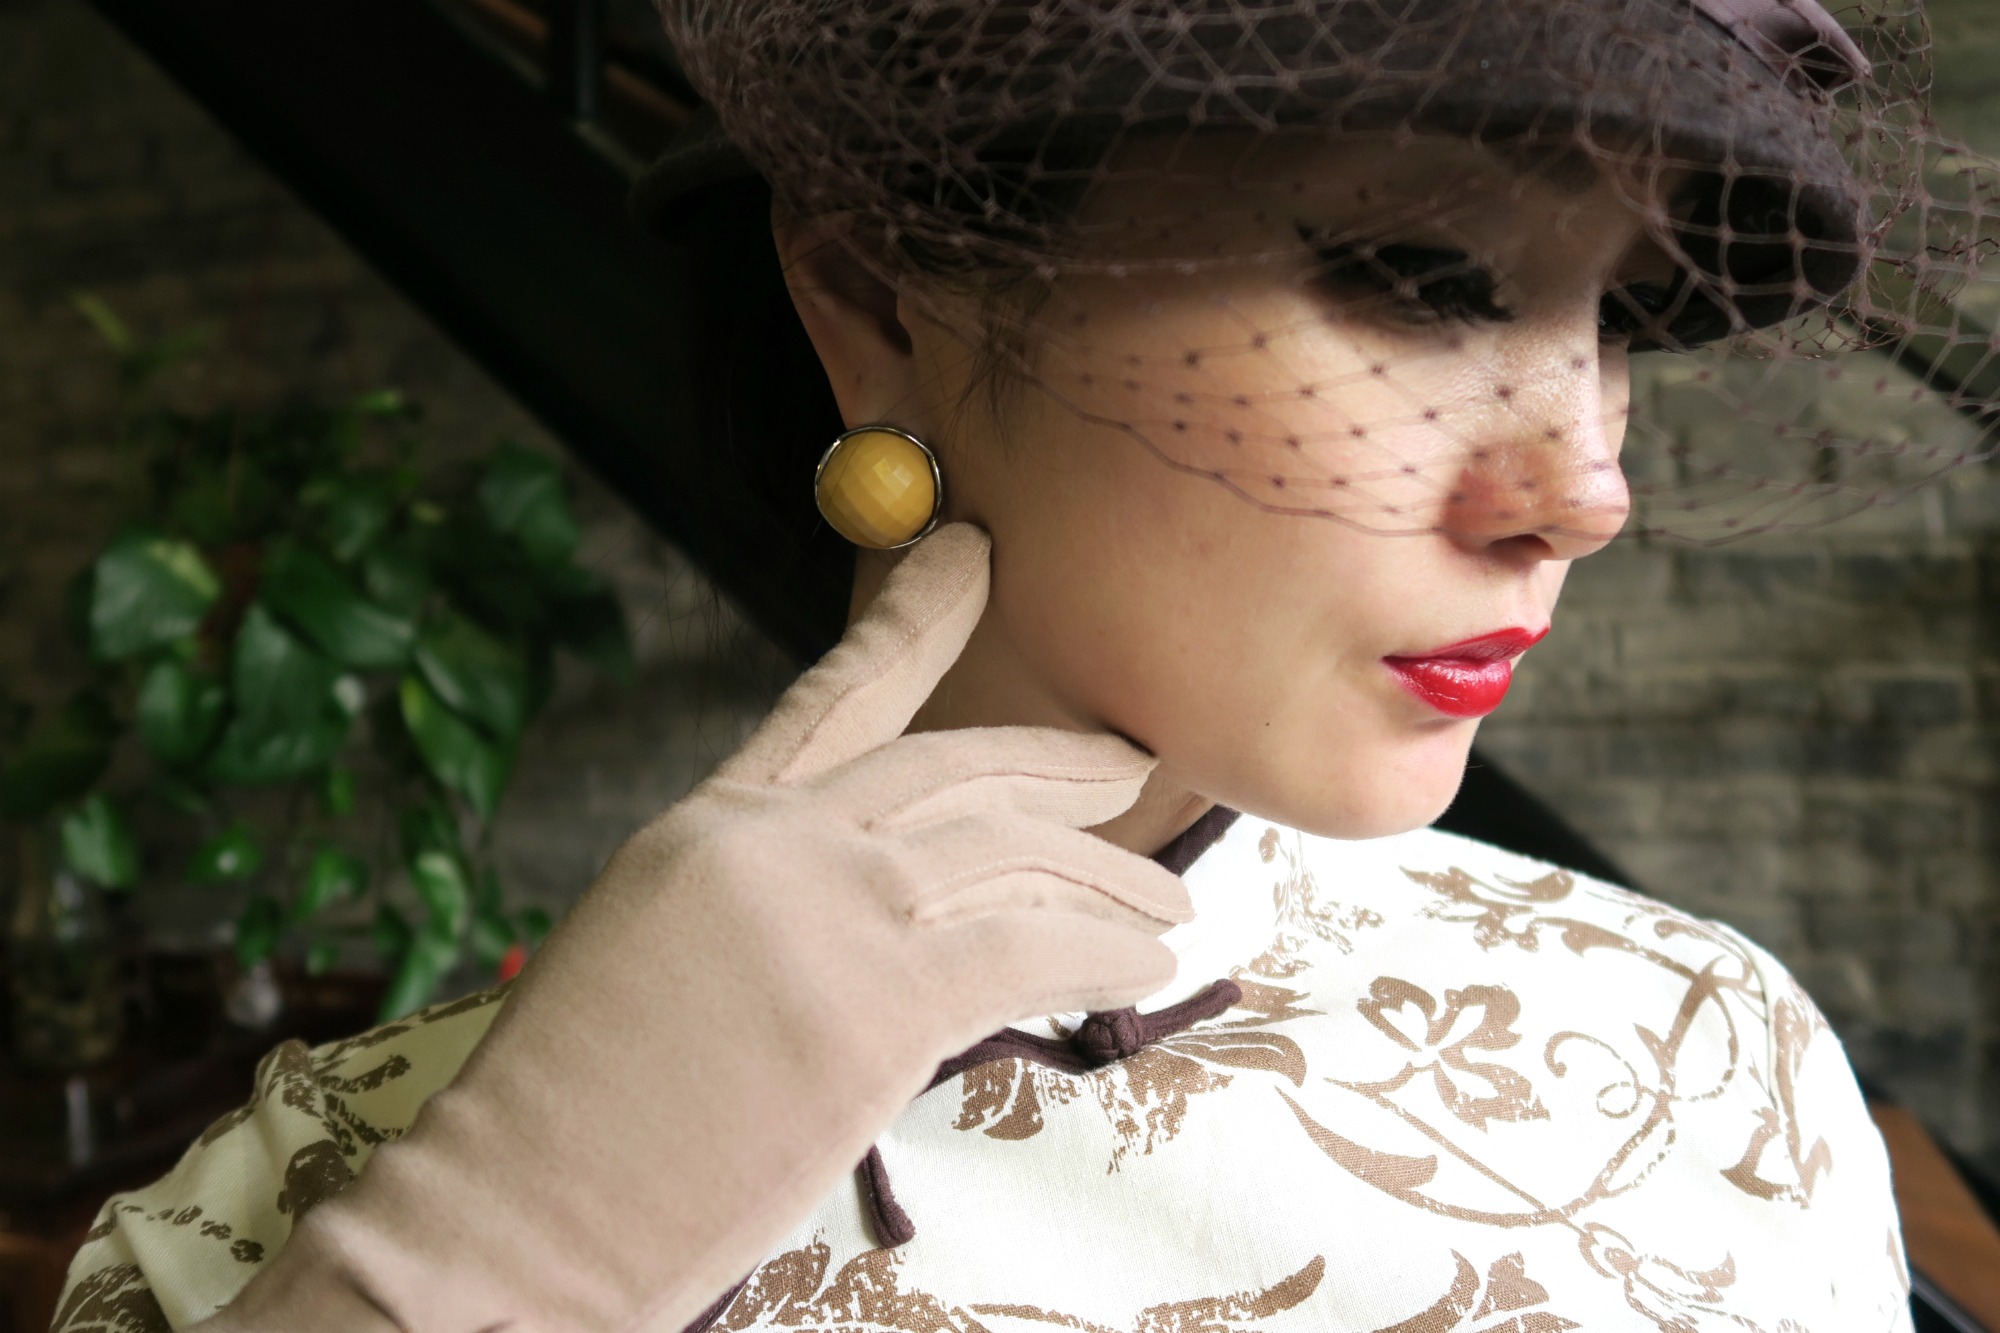 Accessorizing qipao (cheongsam) with hats and gloves